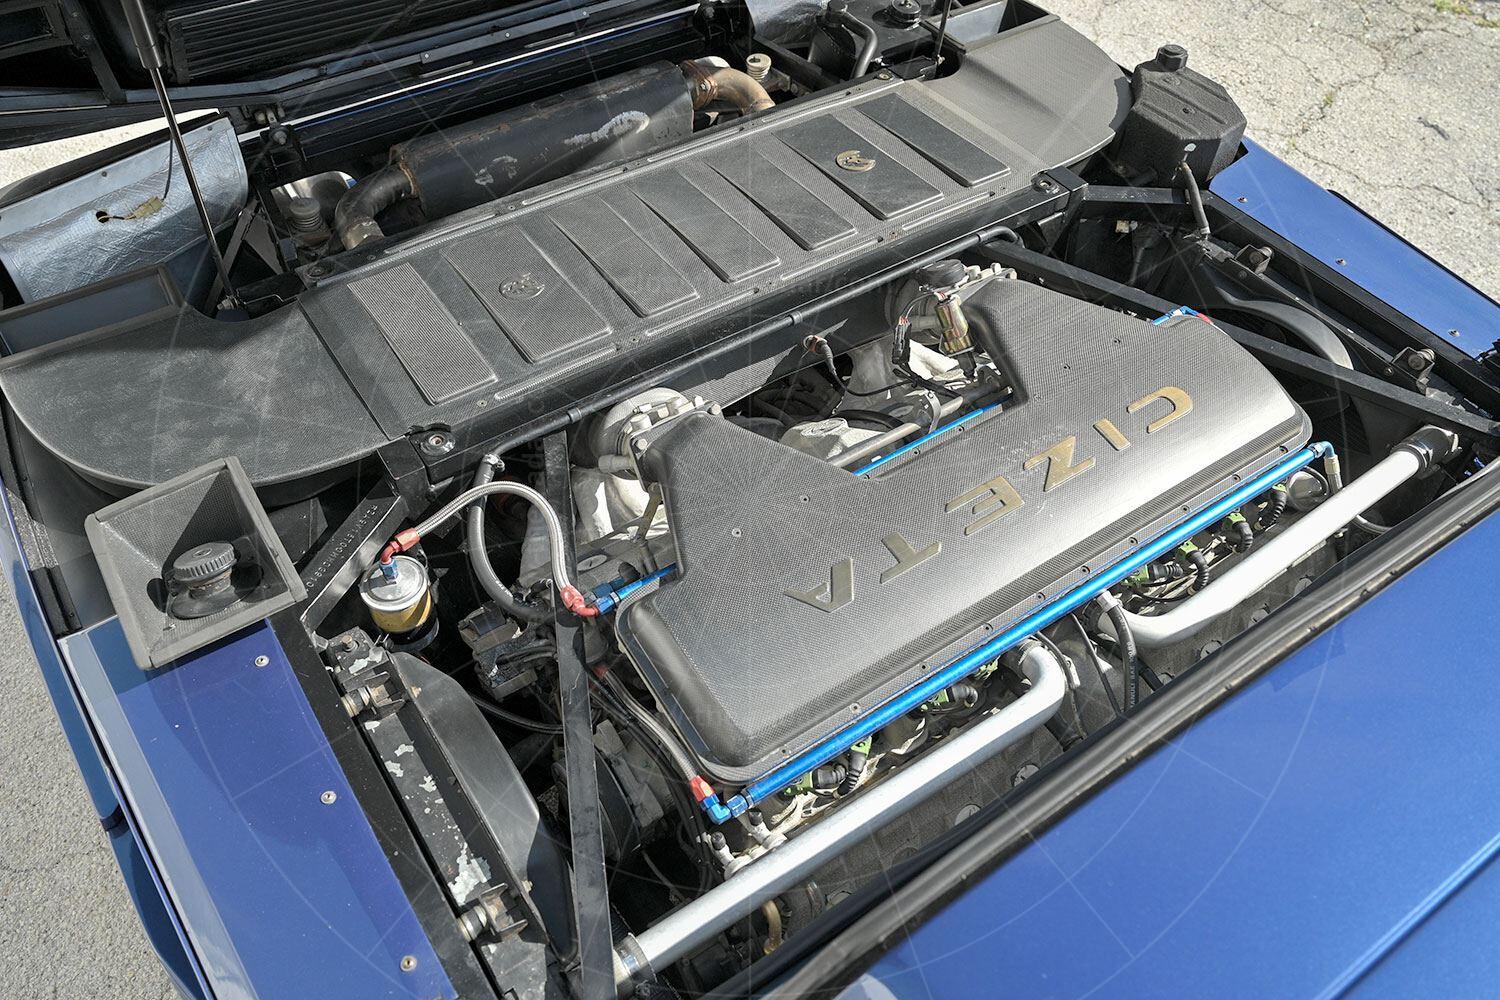 The Cizeta V16T's engine bay Pic: RM Sotheby's | The Cizeta V16T's engine bay